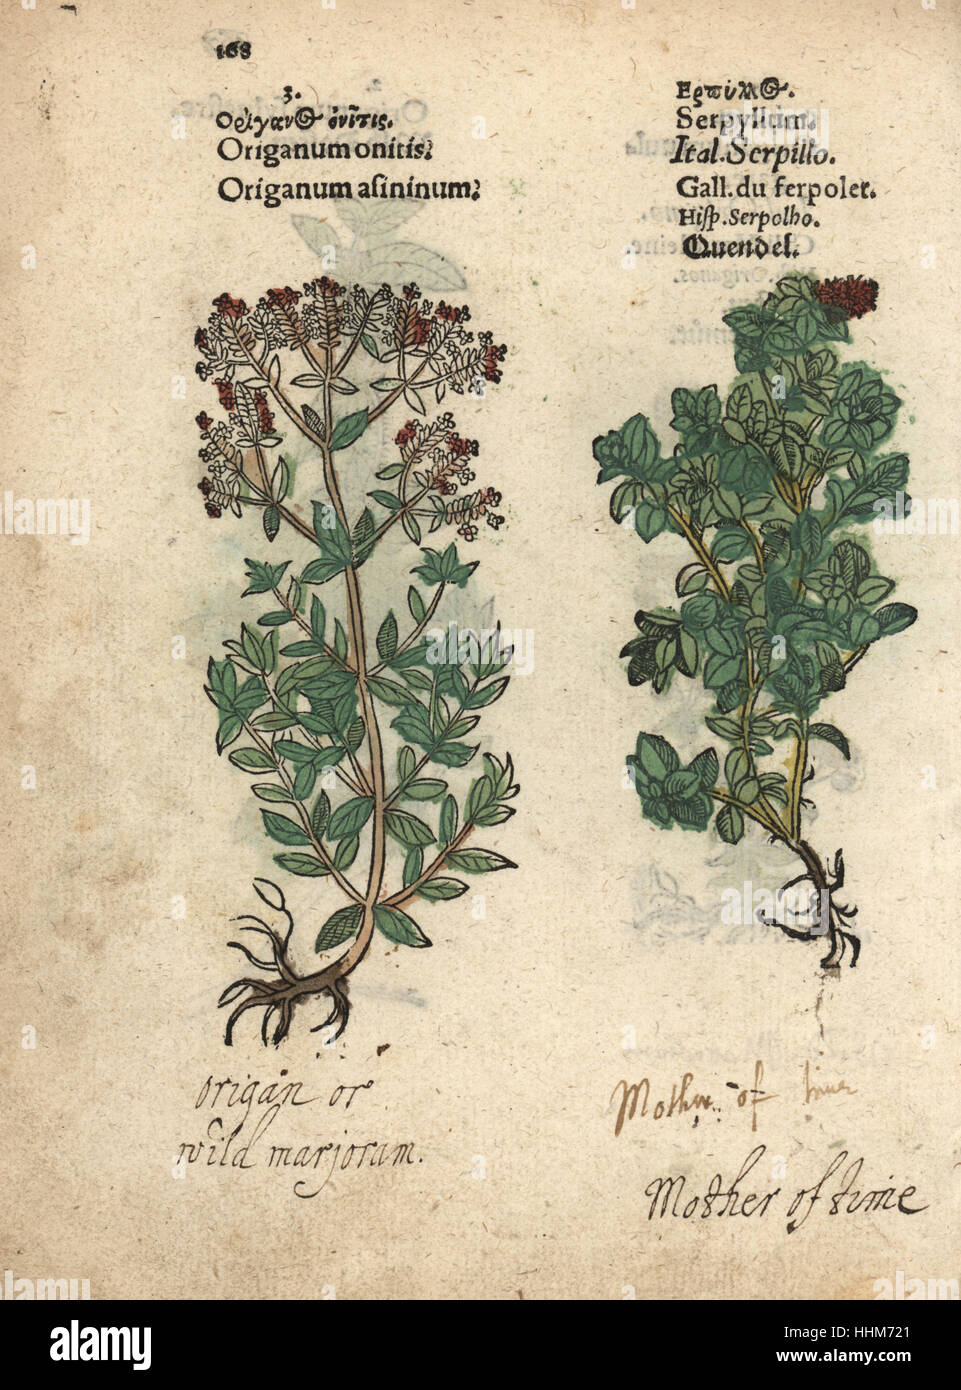 Cretan oregano, Origanum onites, and wild thyme, Thymus serpyllum. Handcoloured woodblock engraving of a botanical illustration from Adam Lonicer's Krauterbuch, or Herbal, Frankfurt, 1557. This from a 17th century pirate edition or atlas of illustrations only, with captions in Latin, Greek, French, Italian, German, and in English manuscript. Stock Photo